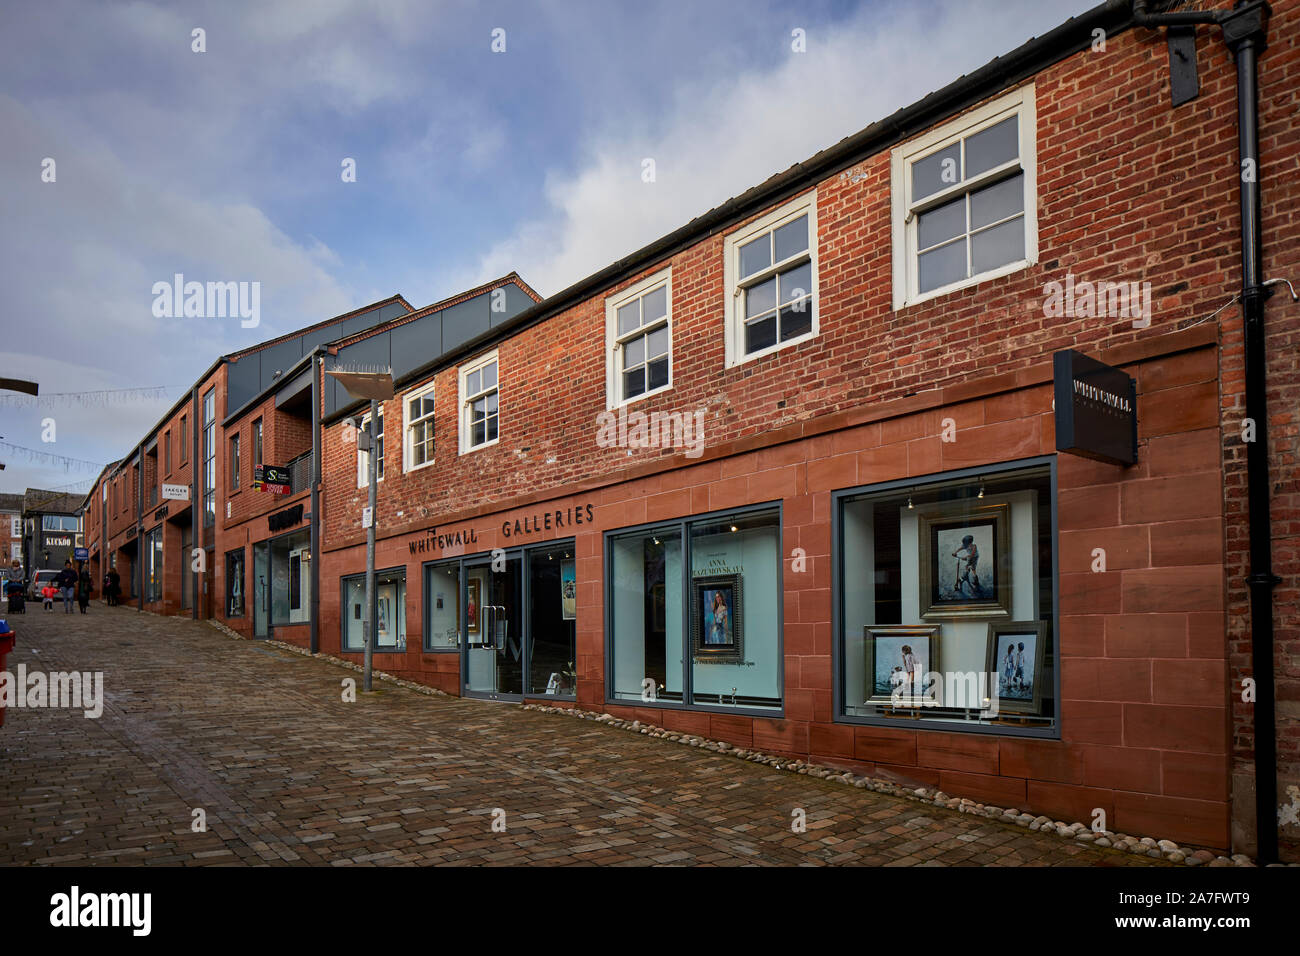 Knutsford town, Cheshire. modern shops on Regent Street  Whitewalls Gallery shop Stock Photo